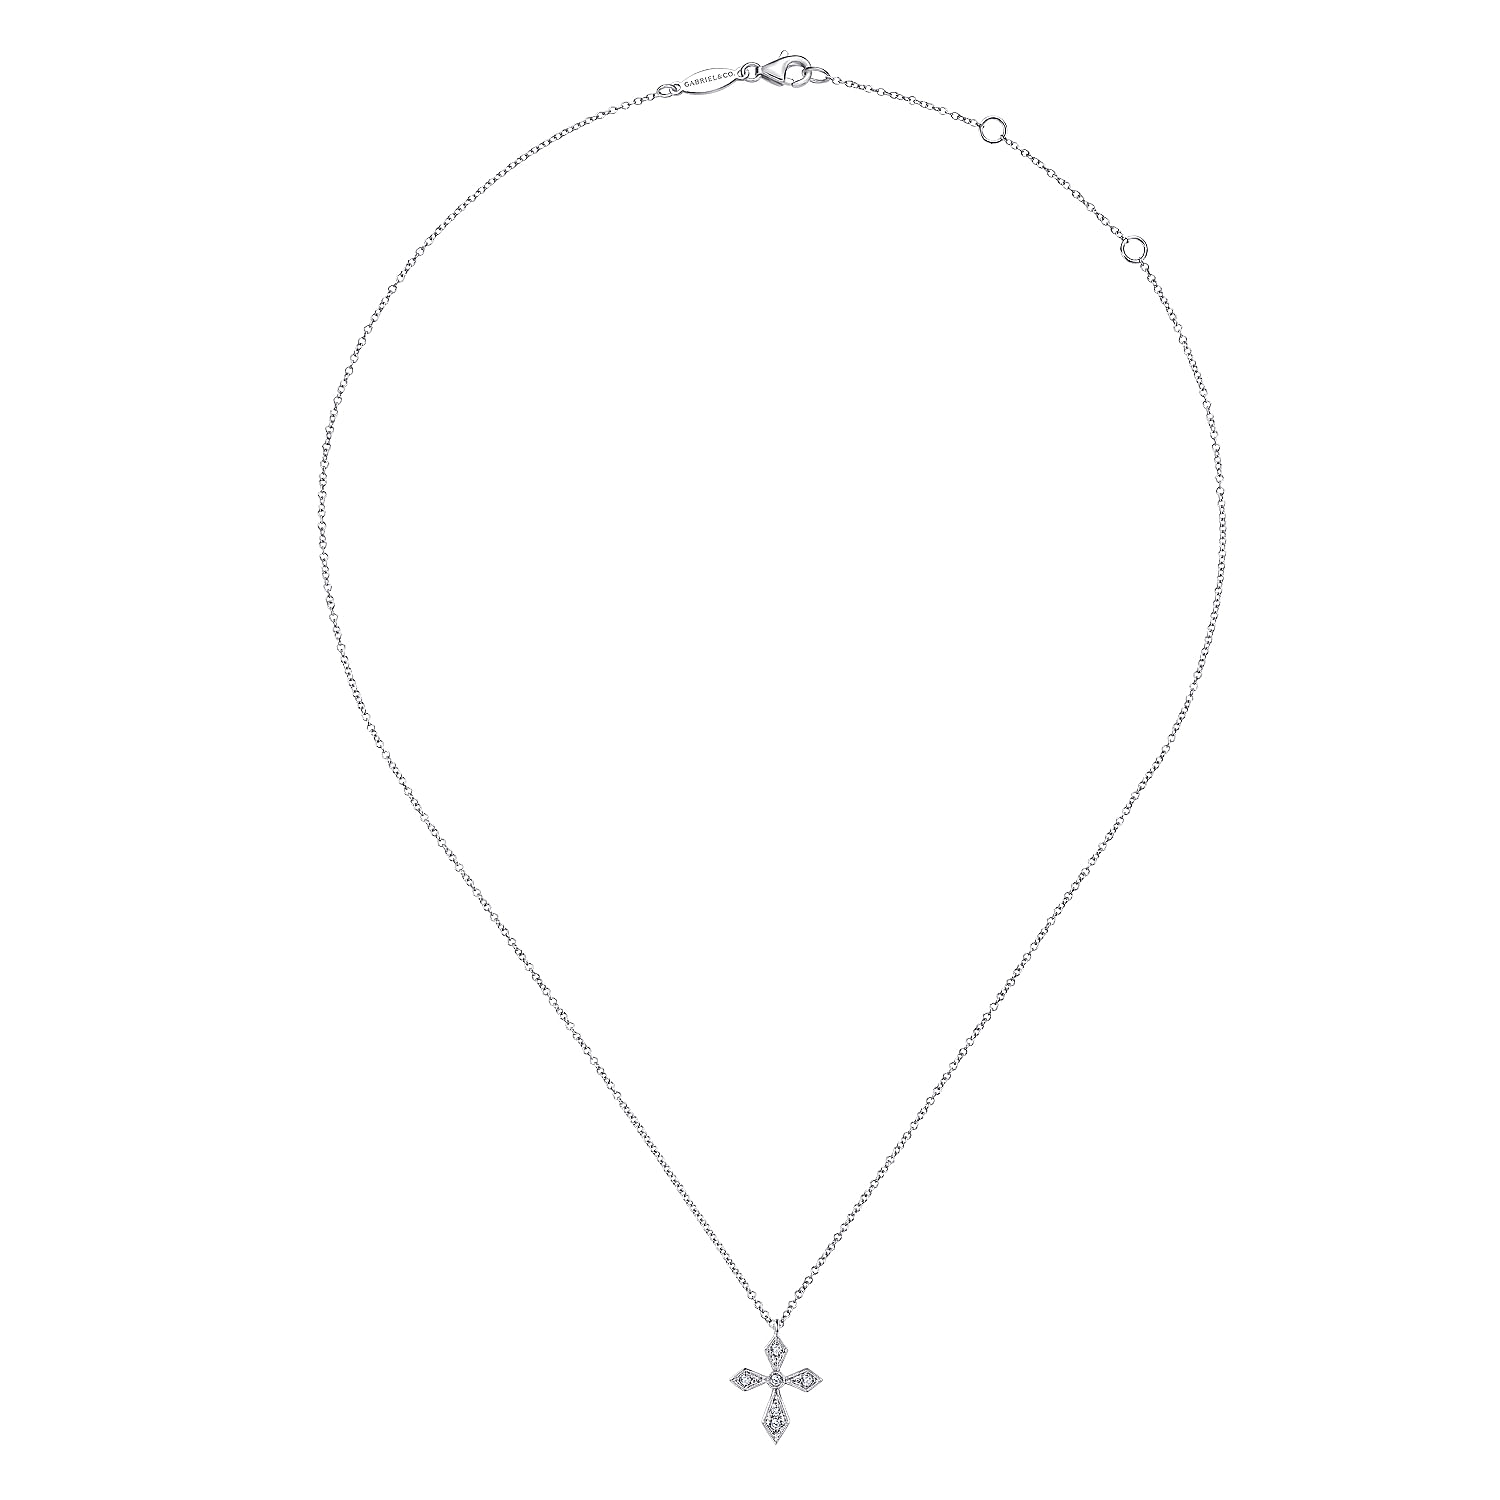 Vintage Inspired 14K White Gold Pointed Diamond Cross Pendant Necklace